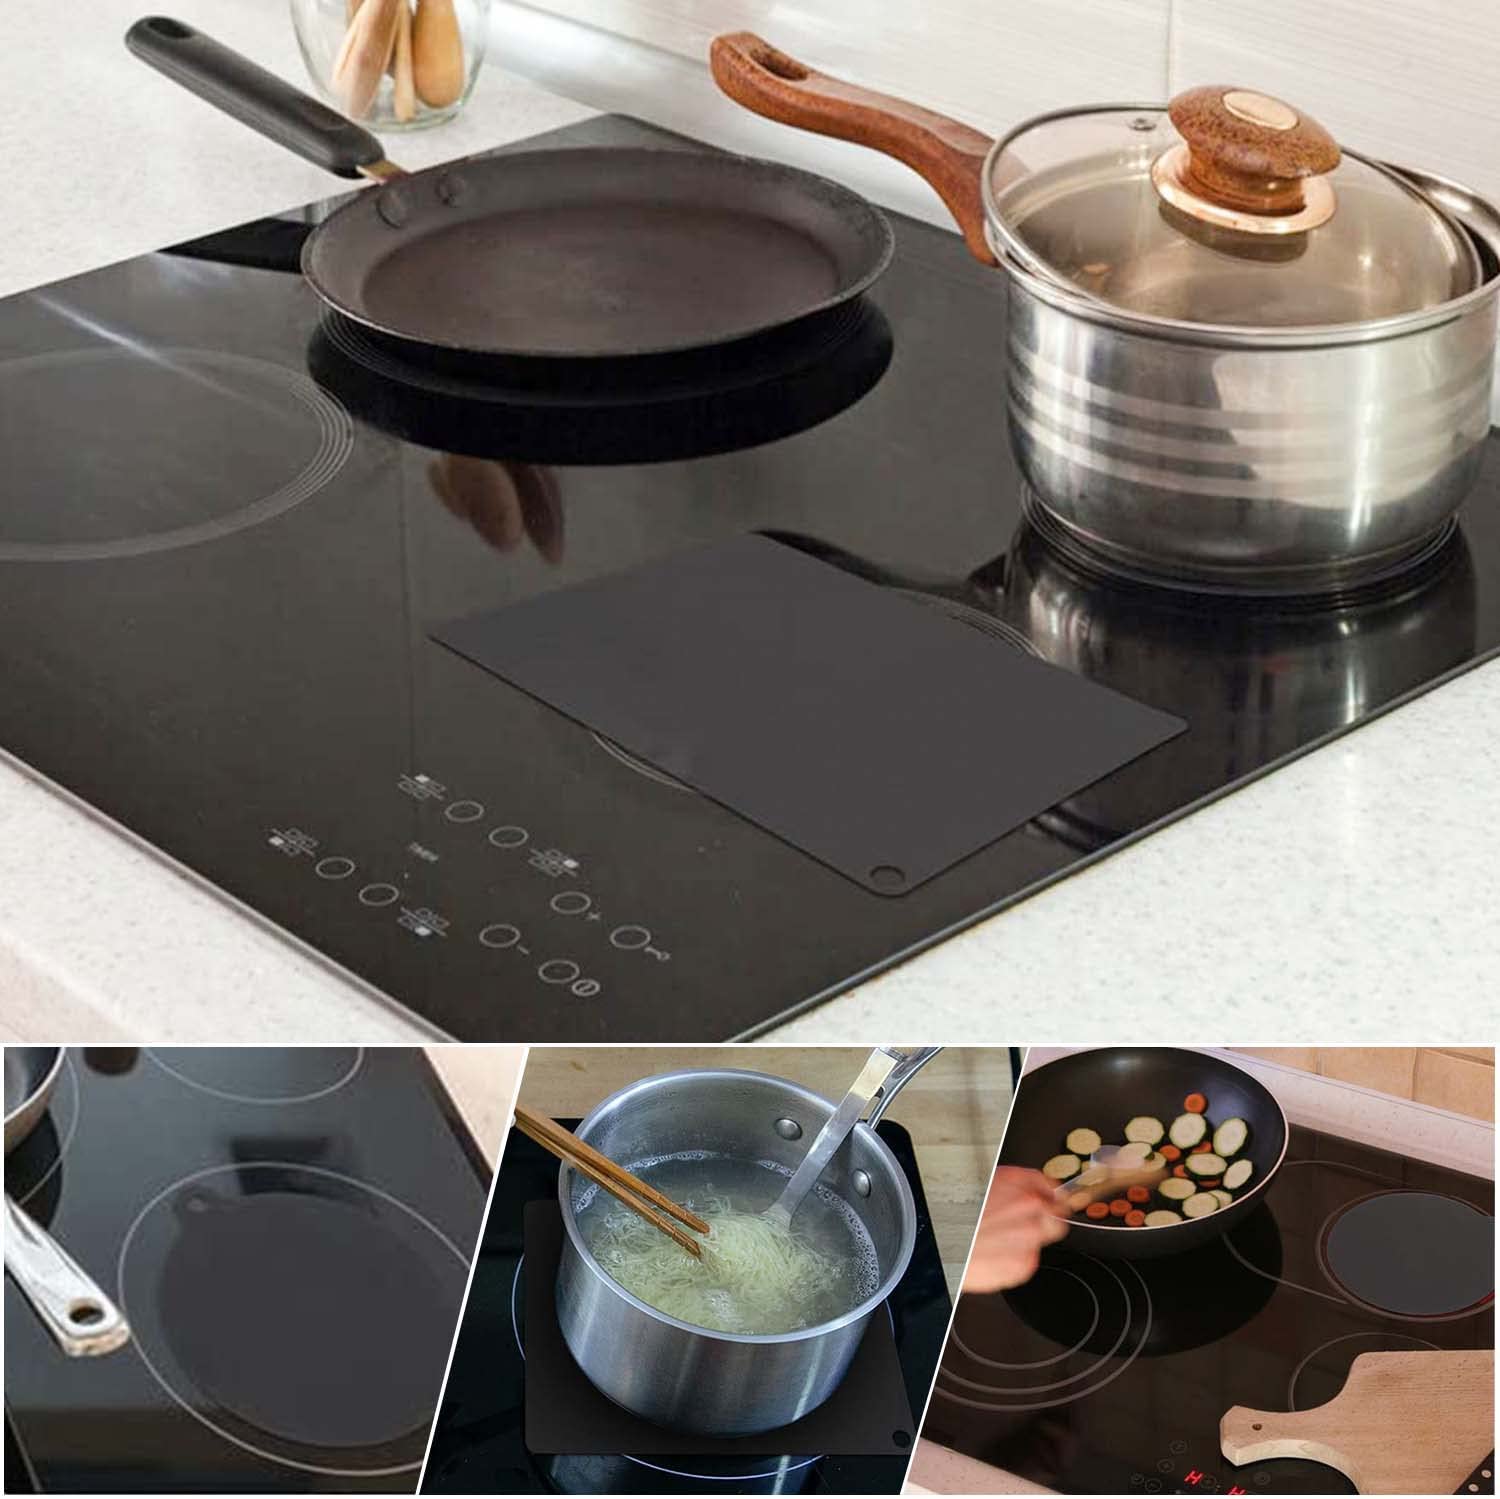 Electric Stove Protector Mat Induction Cooker Protection Pad Non-Slip Stove  Covers For Home Electric Stove Top Kitchen Tools